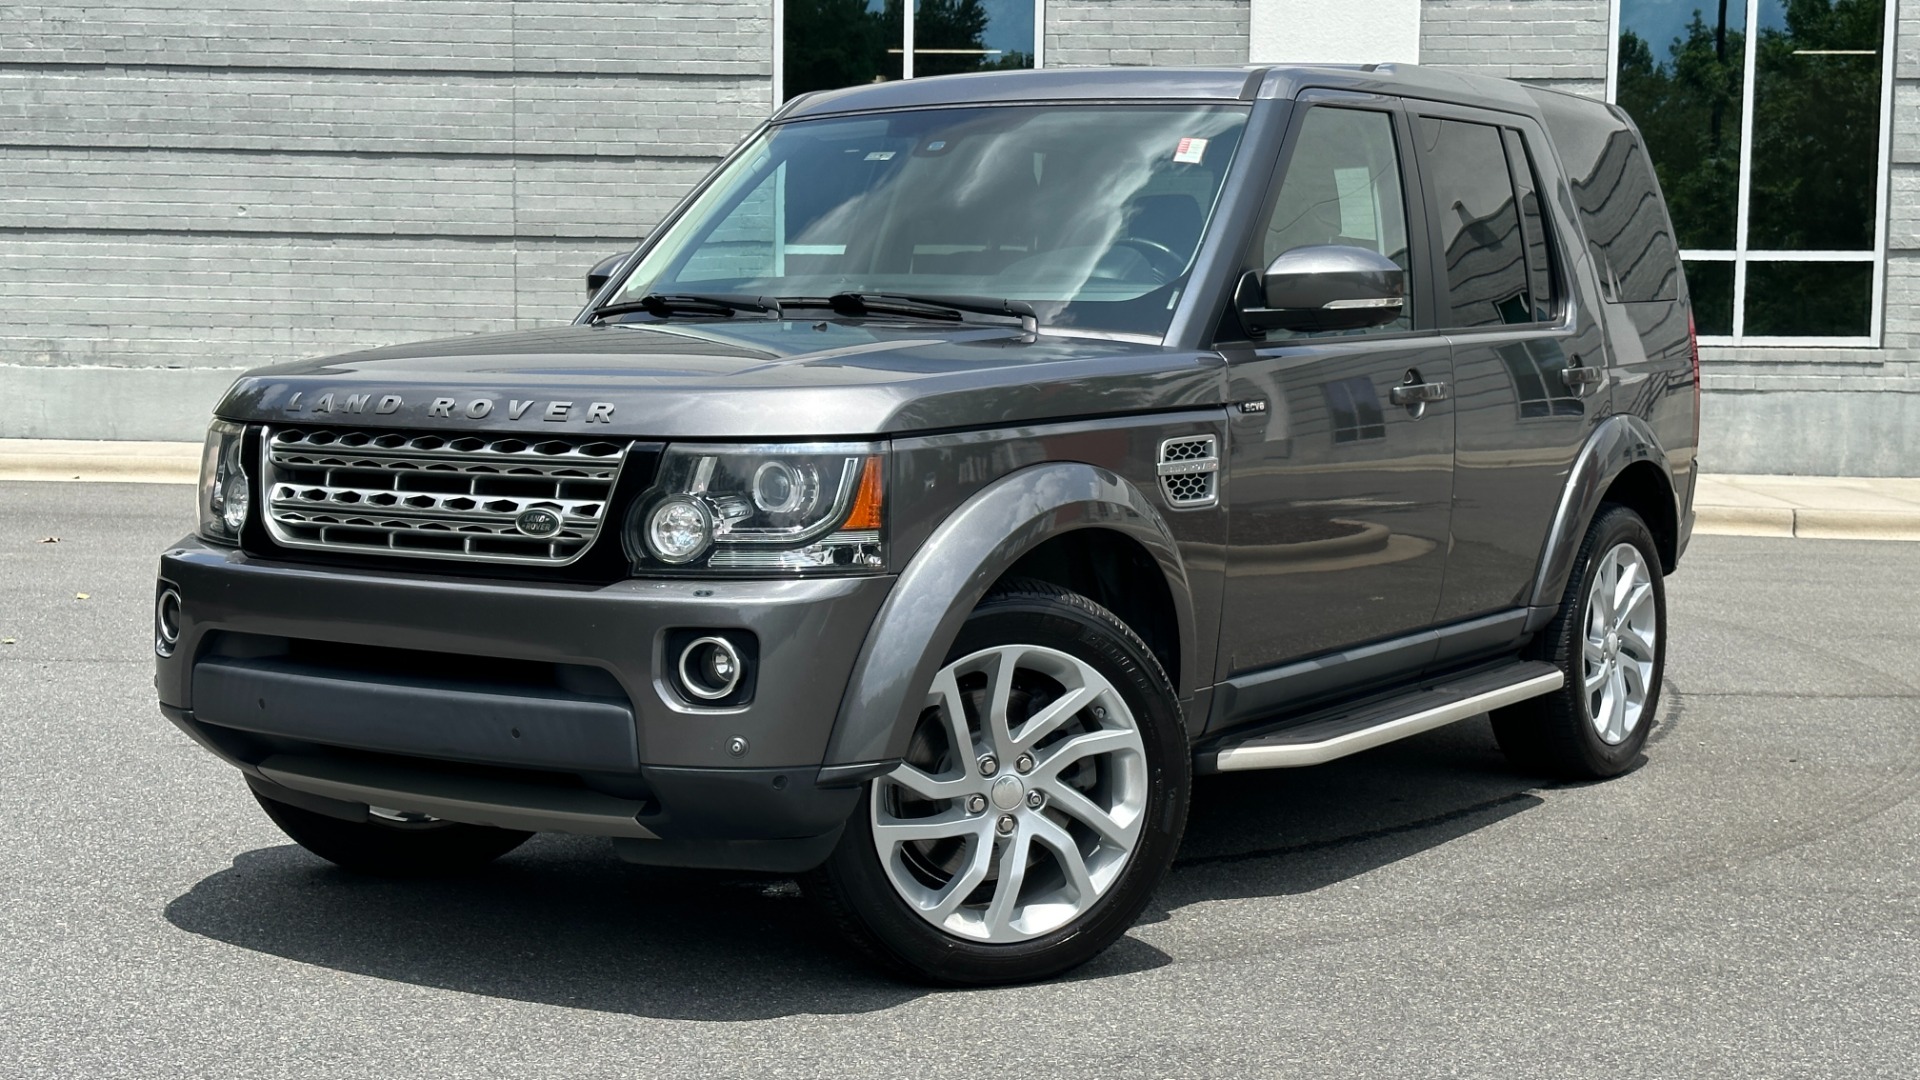 Used 2015 Land Rover LR4 LUX / VISION ASSIST / 20IN WHEELS / GLOSS BLACK TRIM / 3 ROW SEATING for sale $22,500 at Formula Imports in Charlotte NC 28227 1